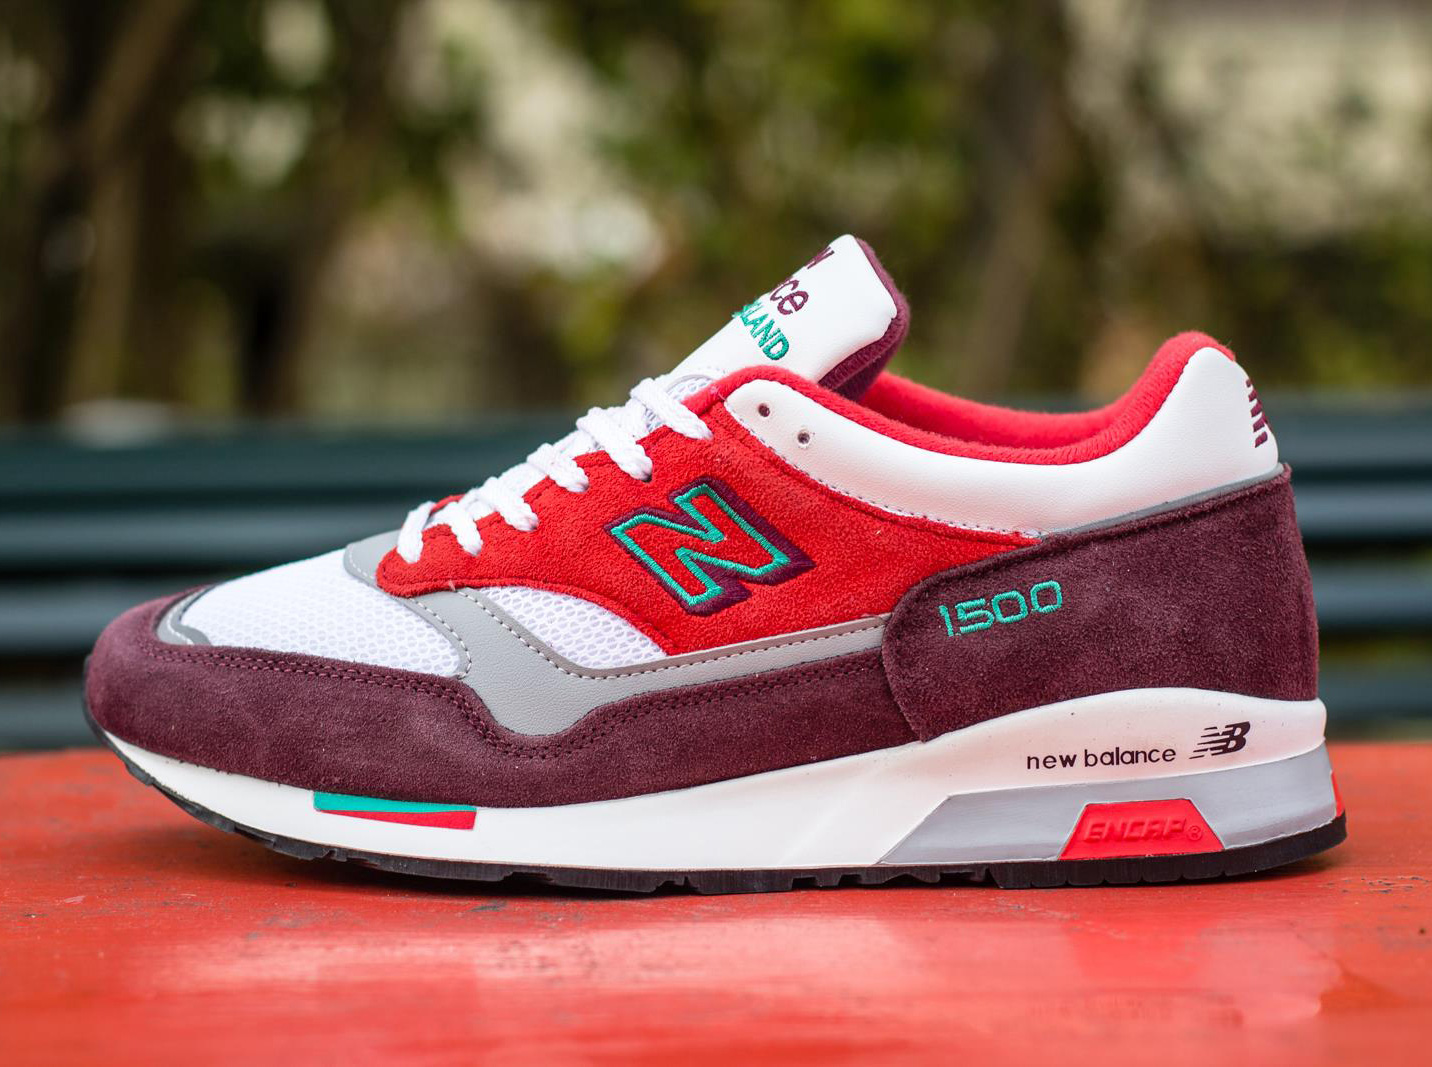 New Balance 1500 "Made in England" - Red - Green